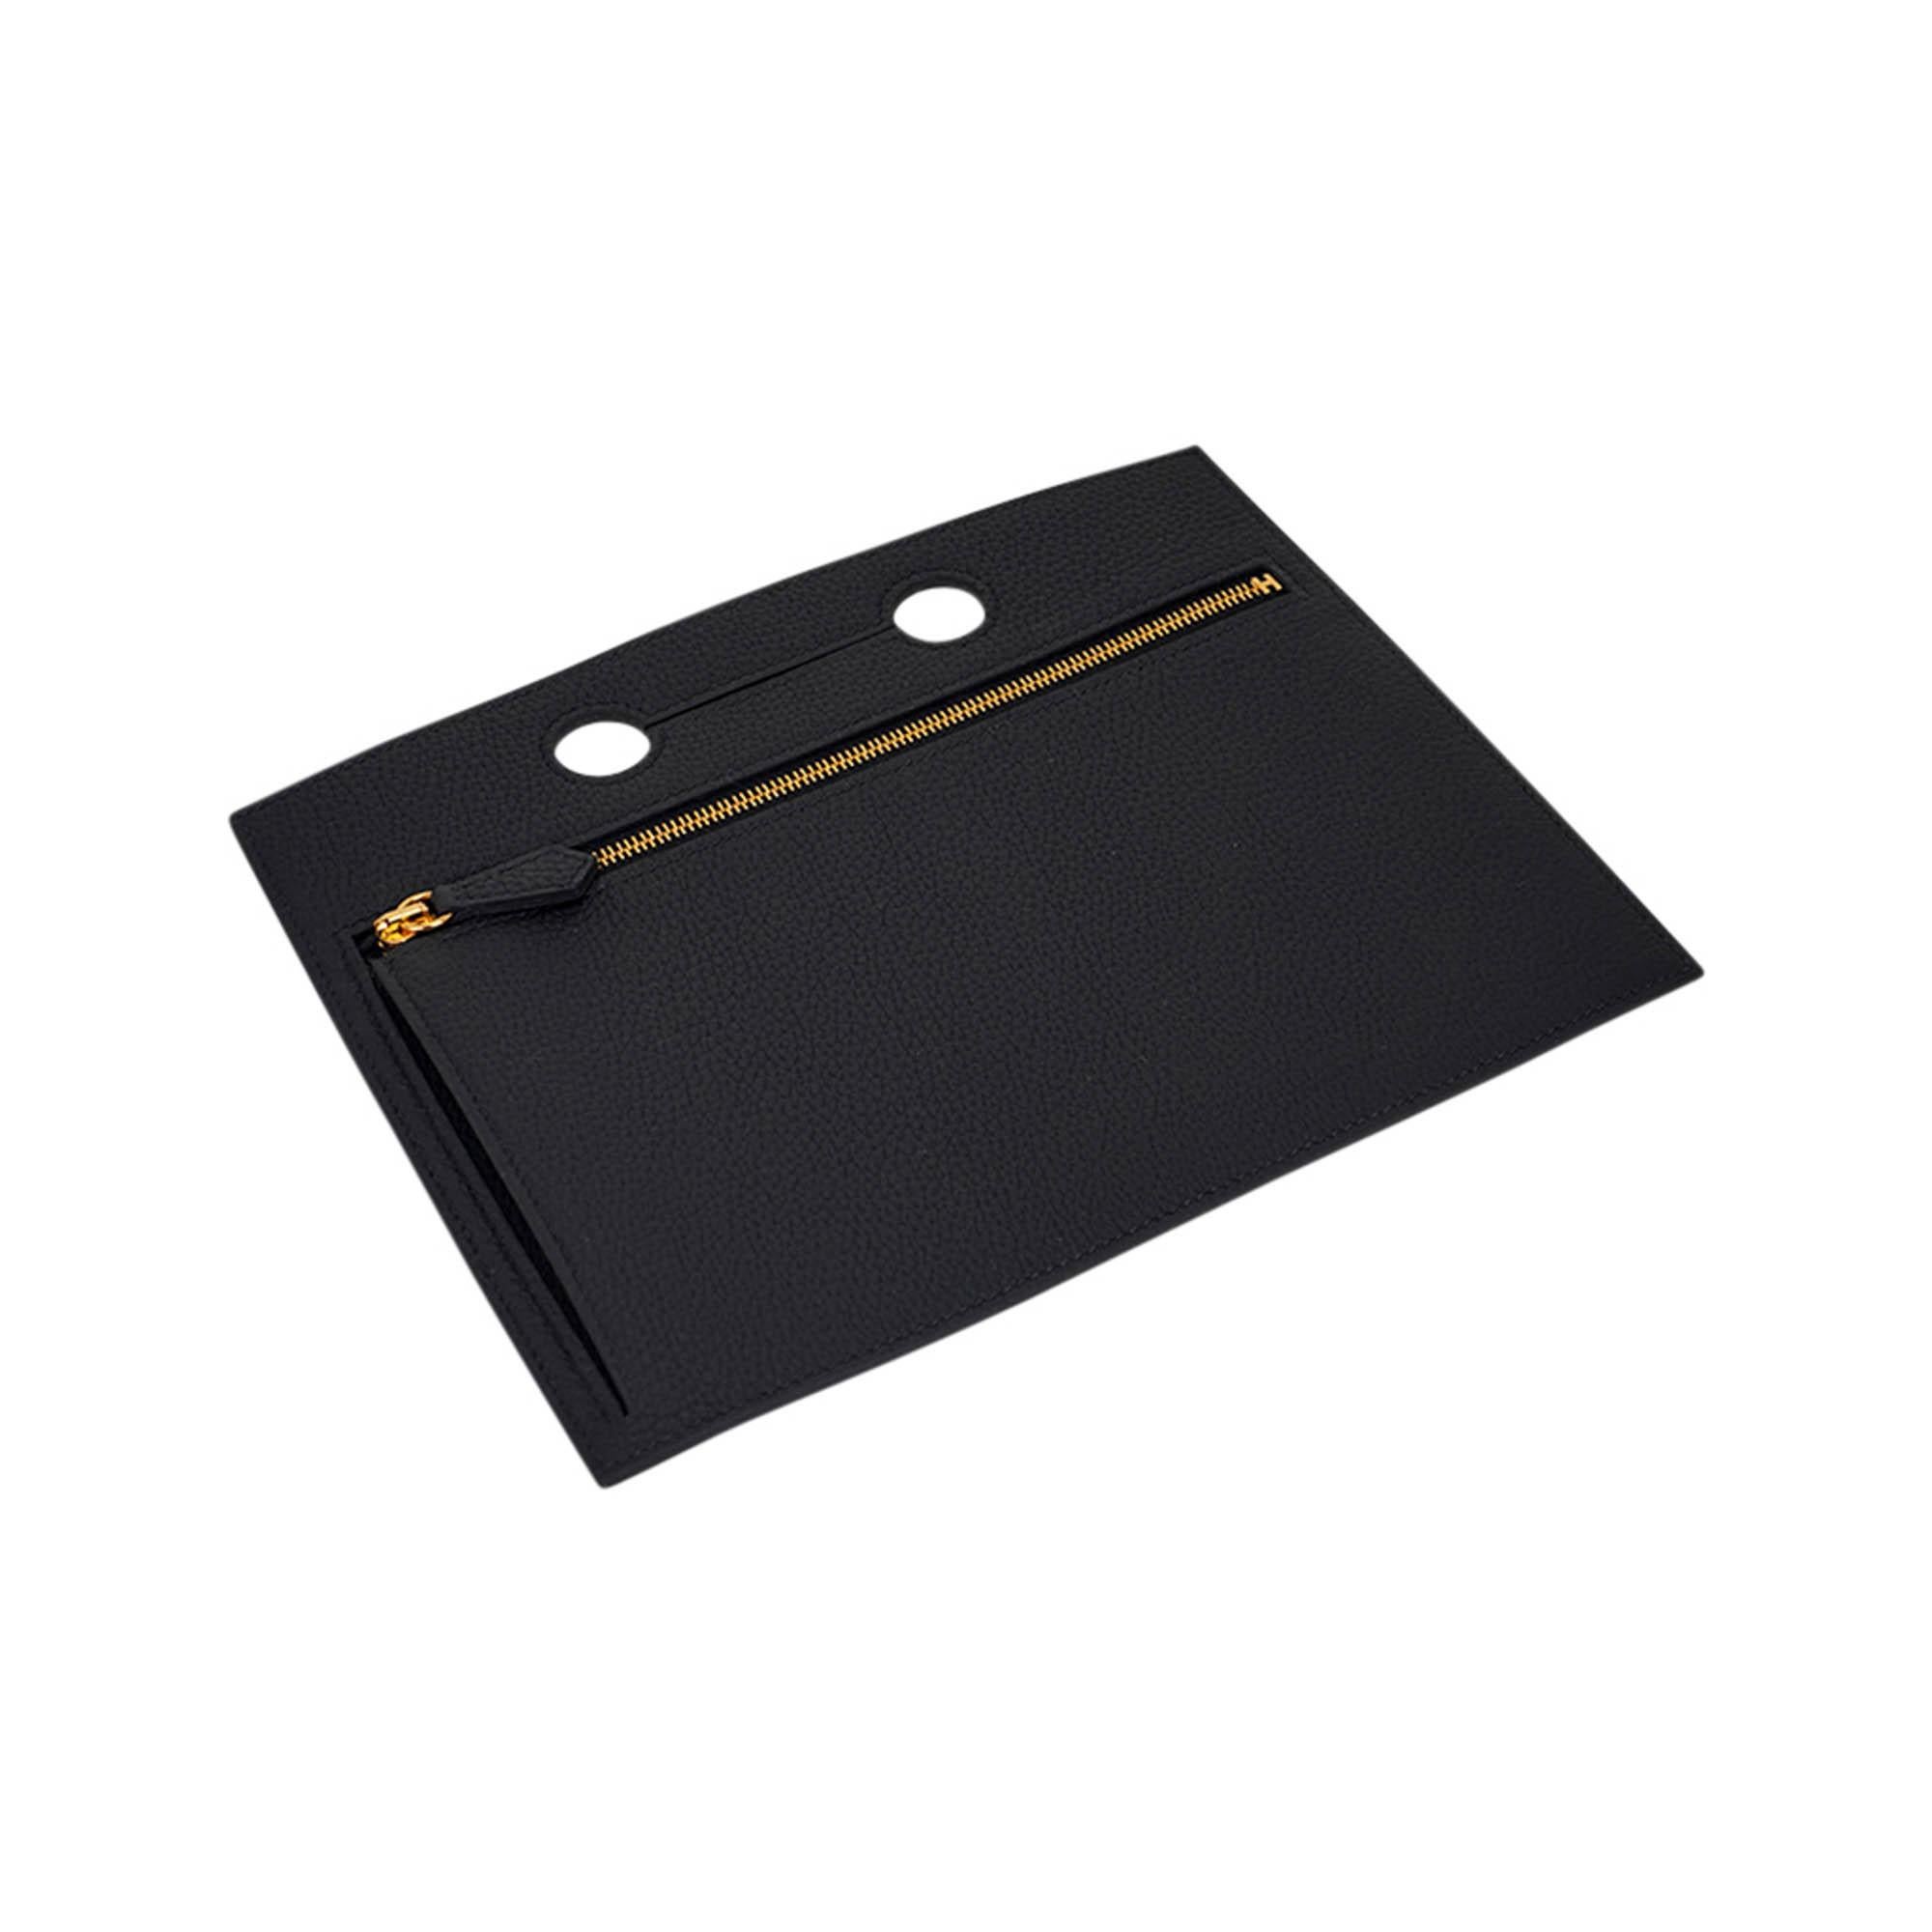 Mightychic offers an Hermes Backpocket 25 Pouch featured in Black.
Beautiful in Togo leather with gold zipper.
This flat Backpocket fits easily over the handle and features a partitioned interior.
In a fabulous neutral color!  And fun to mix and